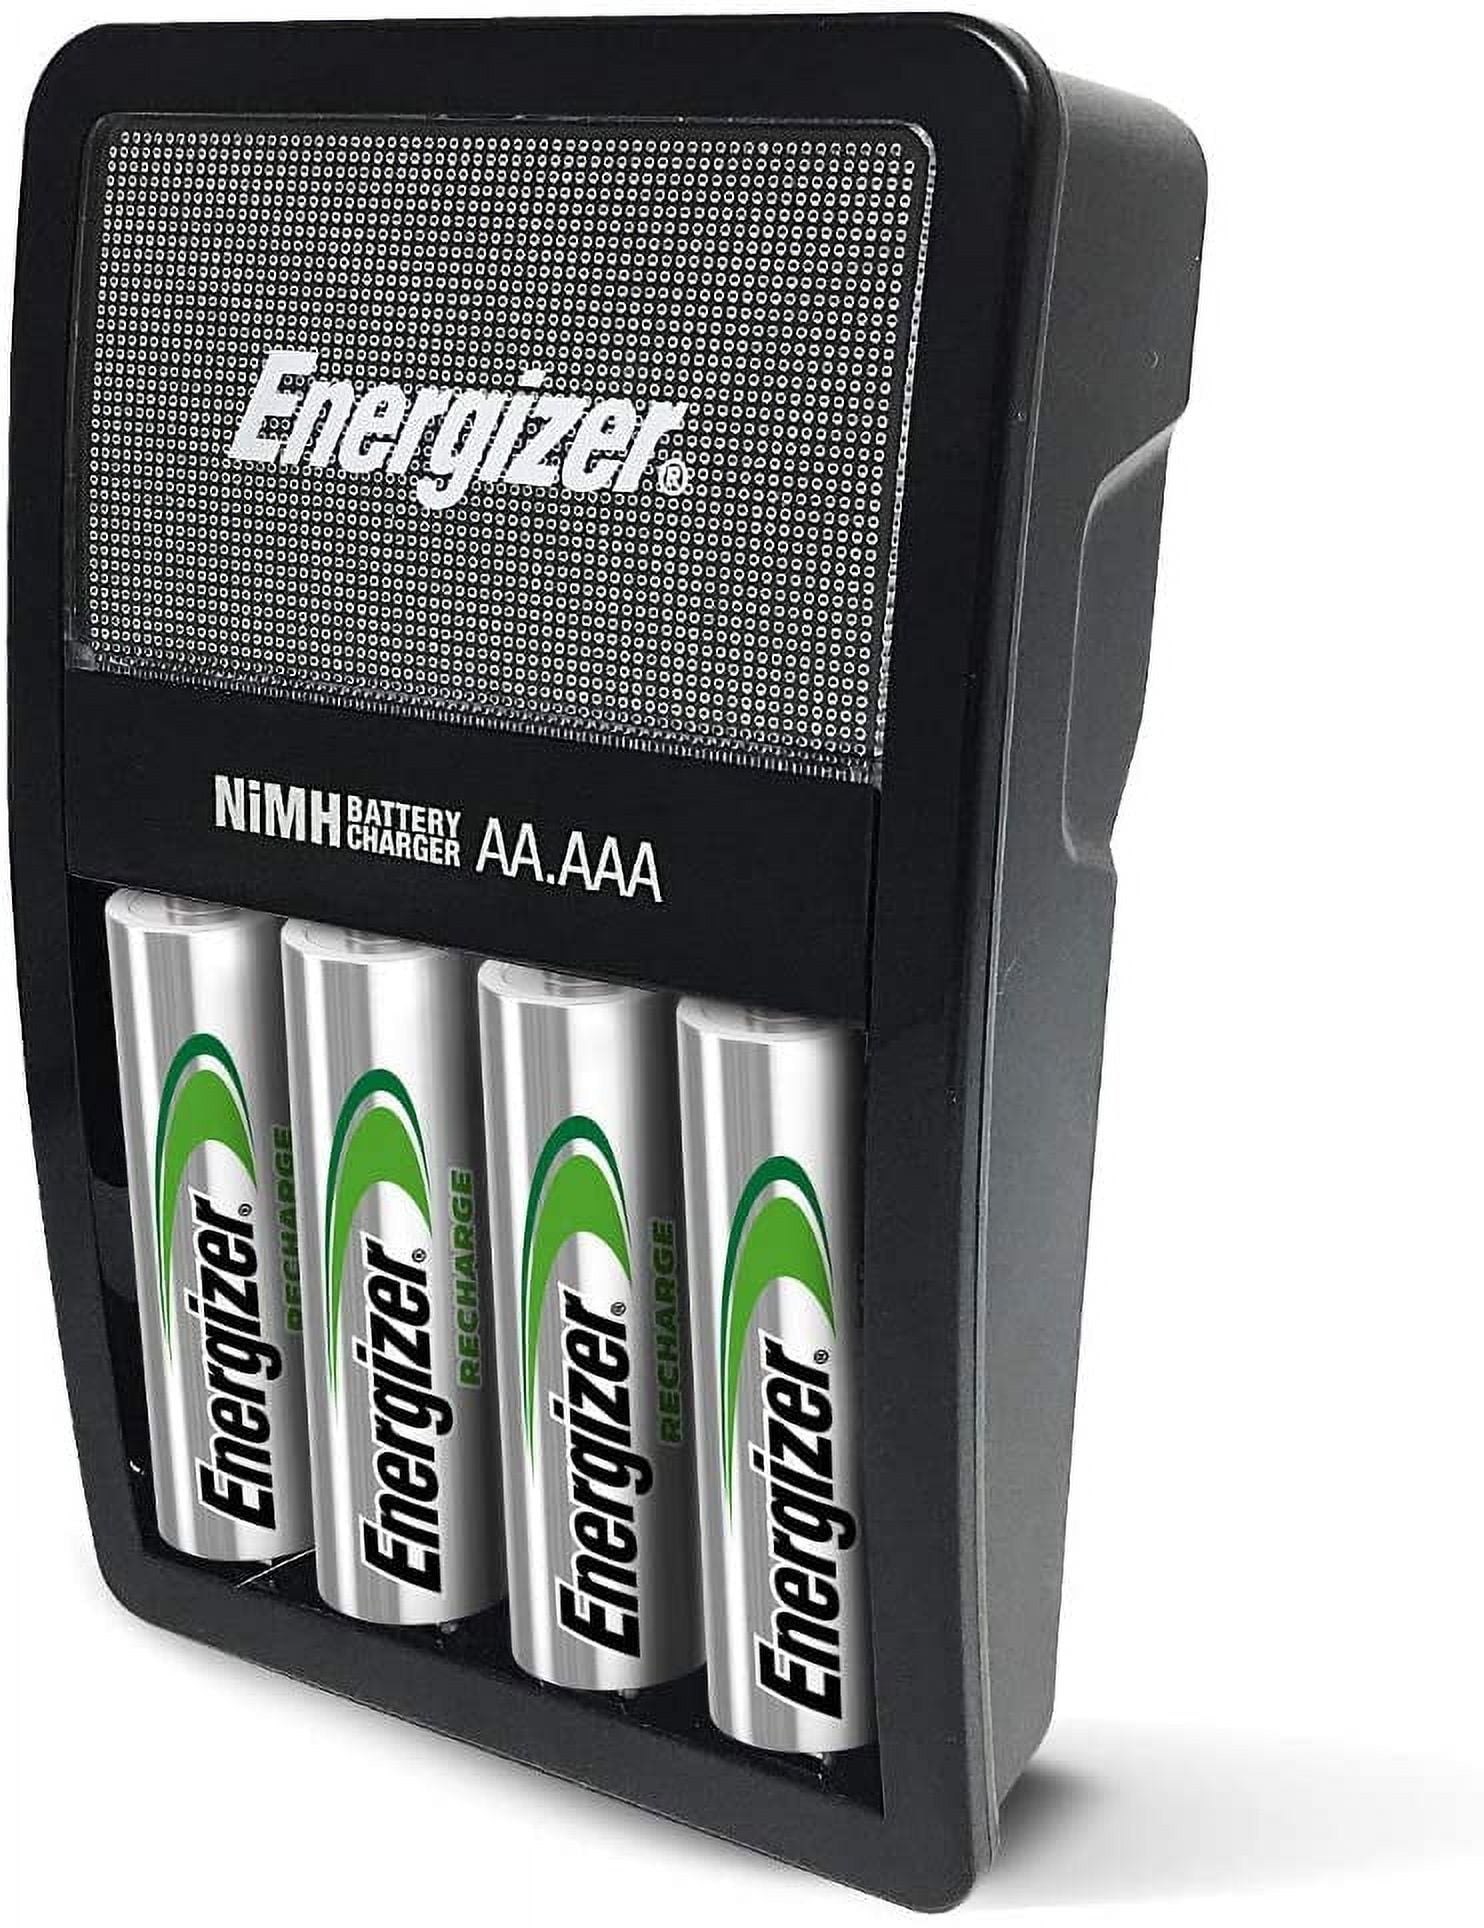 Energizer Recharge Value Charger For Nimh Rechargeable Aa And Aaa